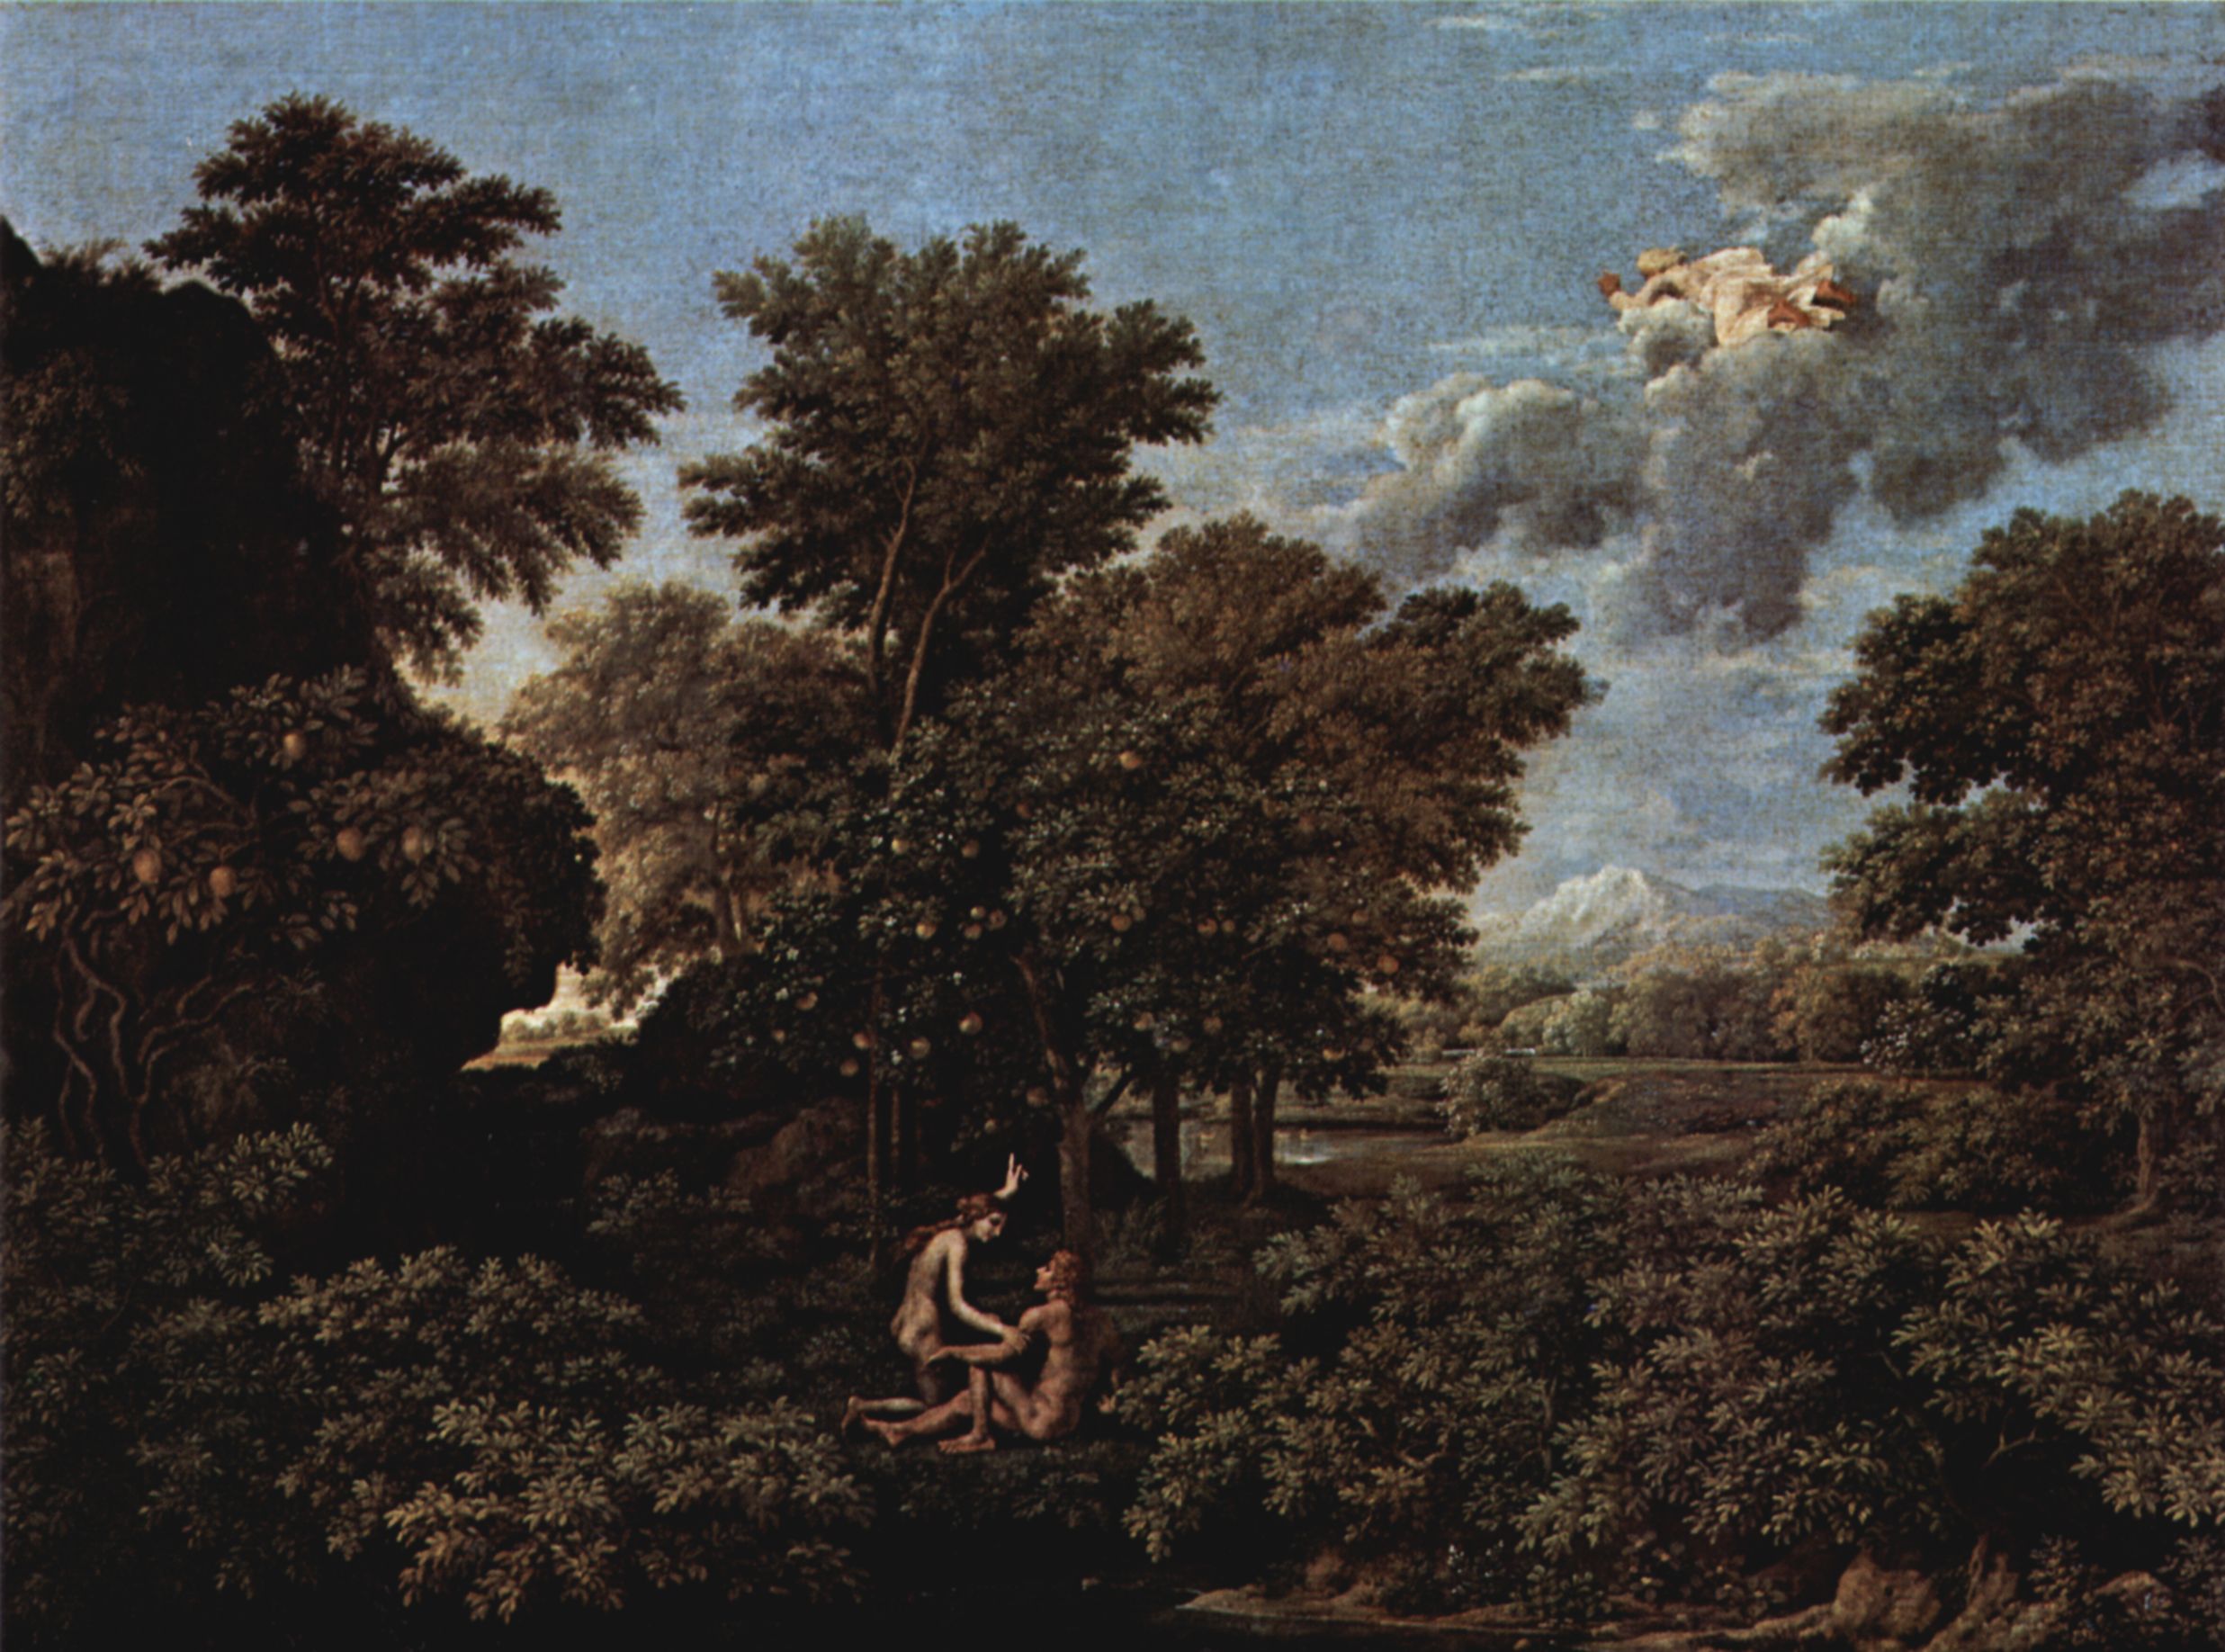 Spring (The Earthly Paradise), Nicolas Poussin, 1660